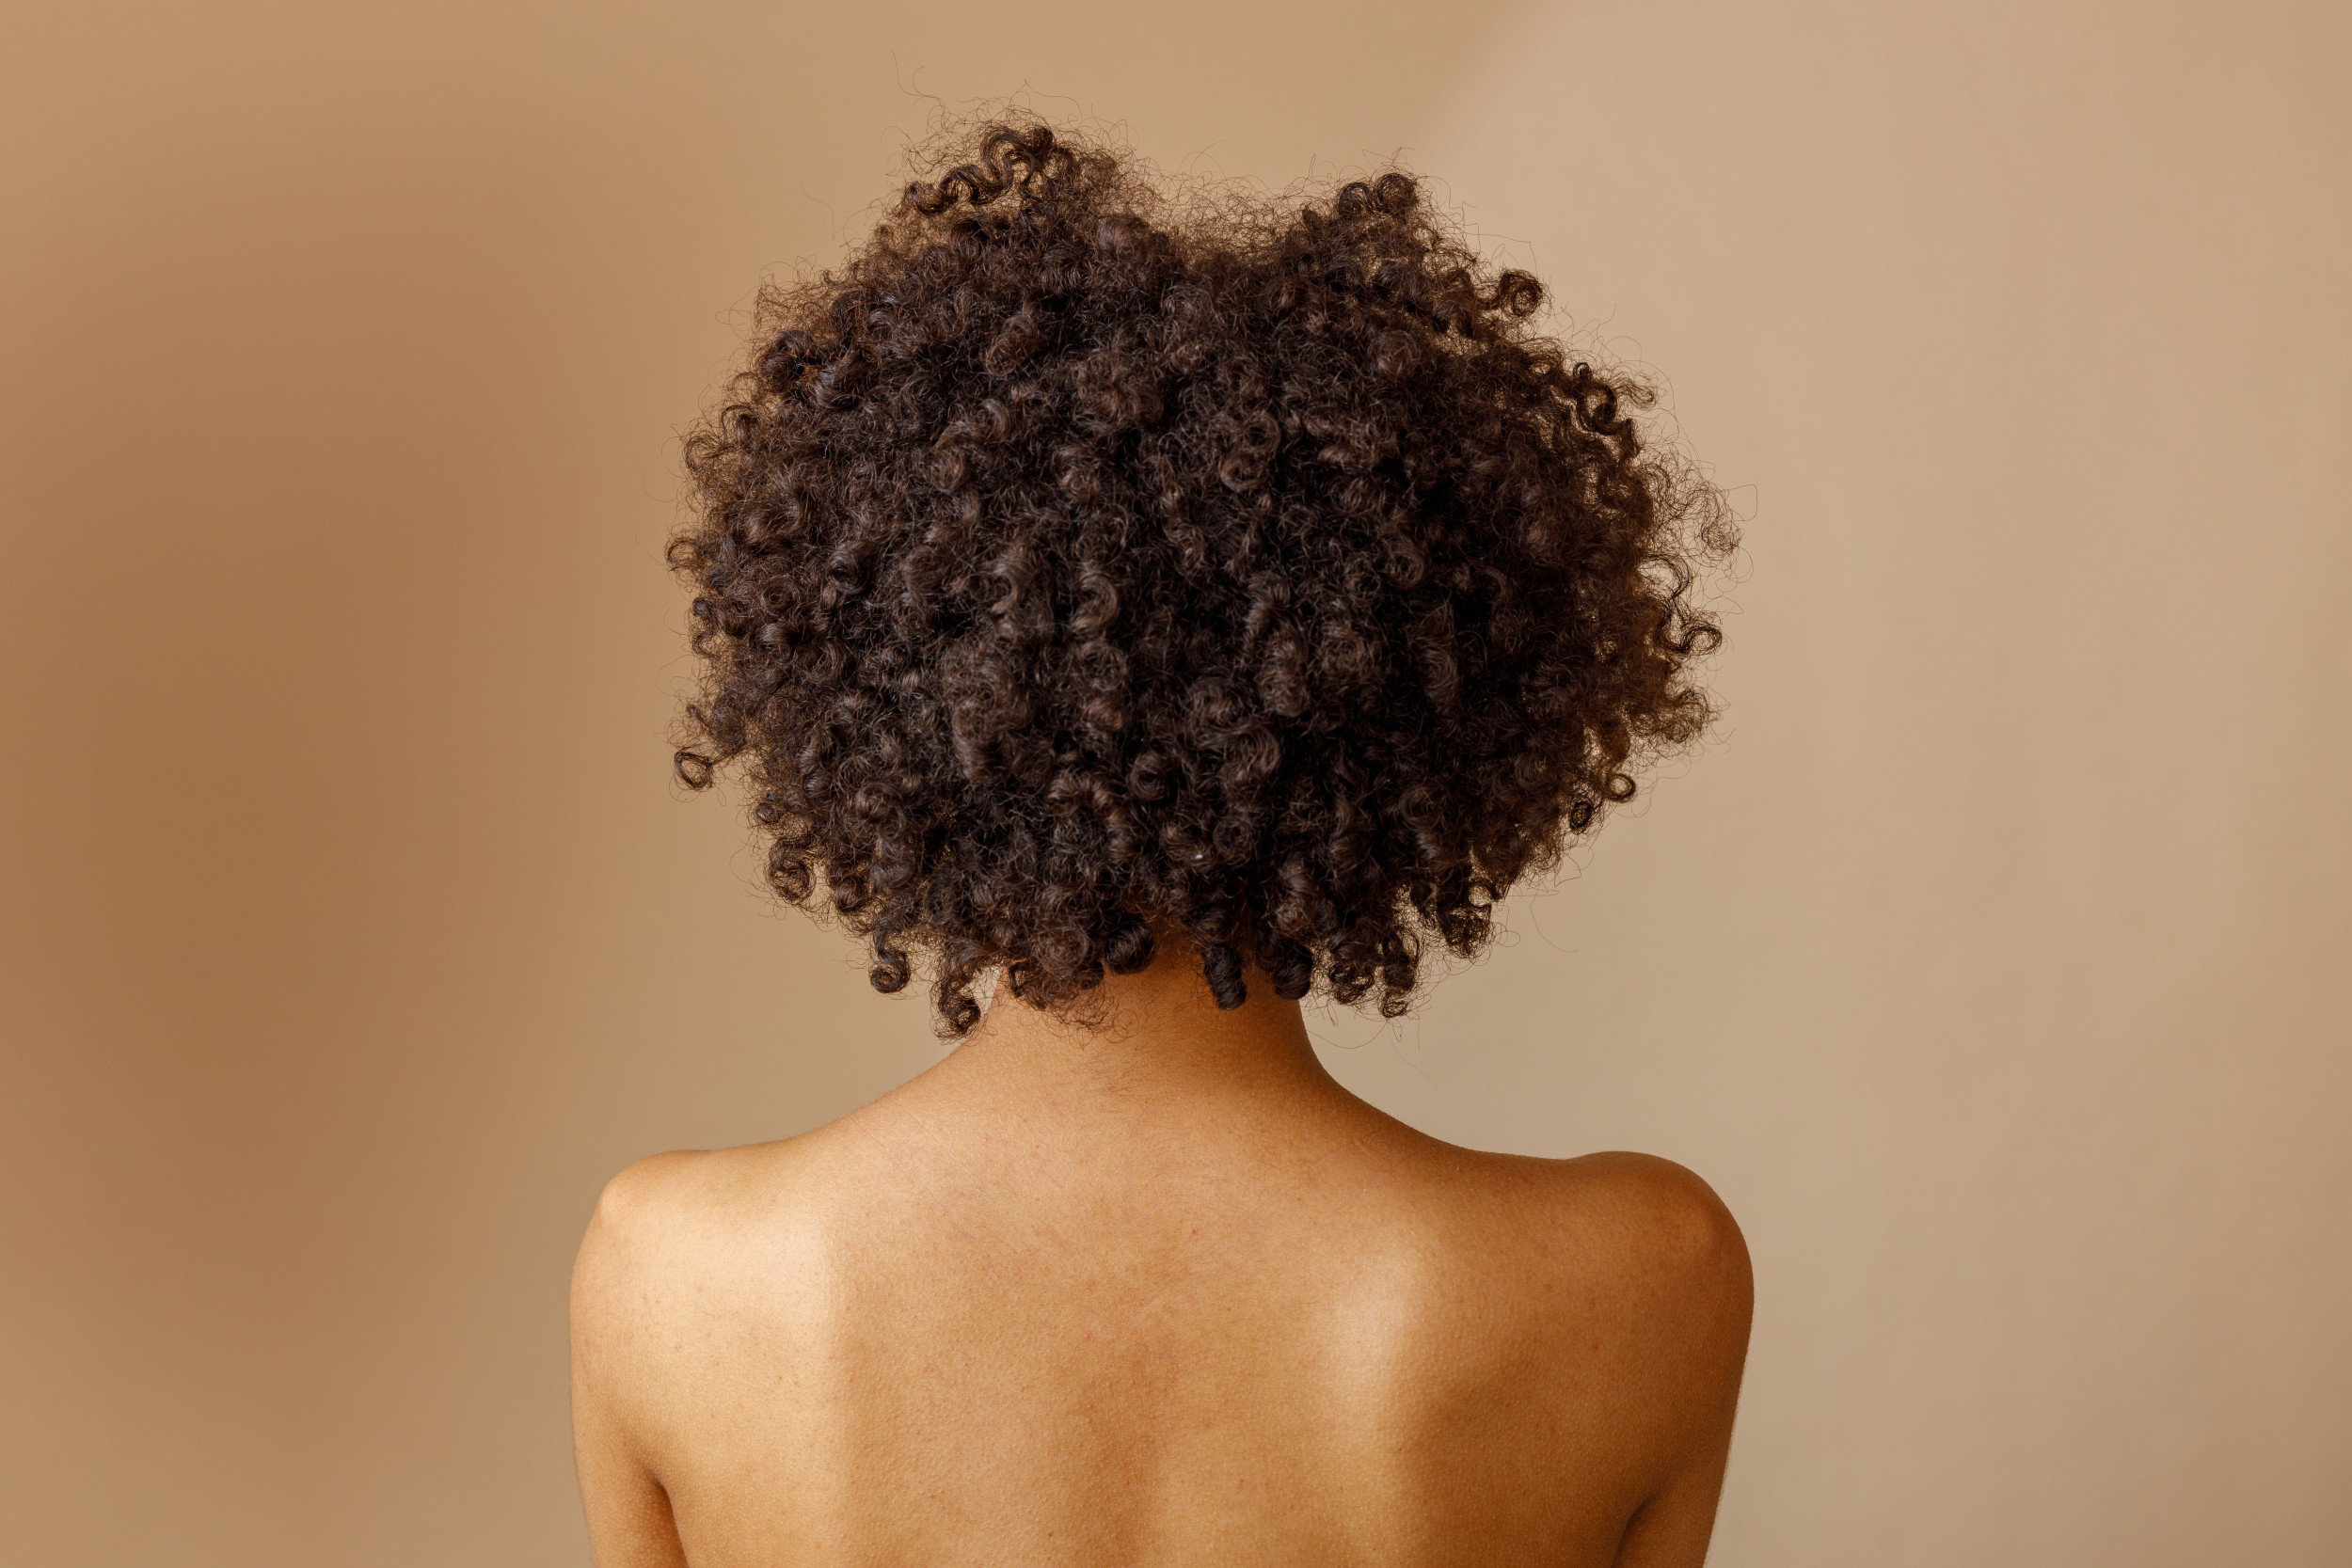 Curly Hair May Have Been Key to Human Brains Growing So Big